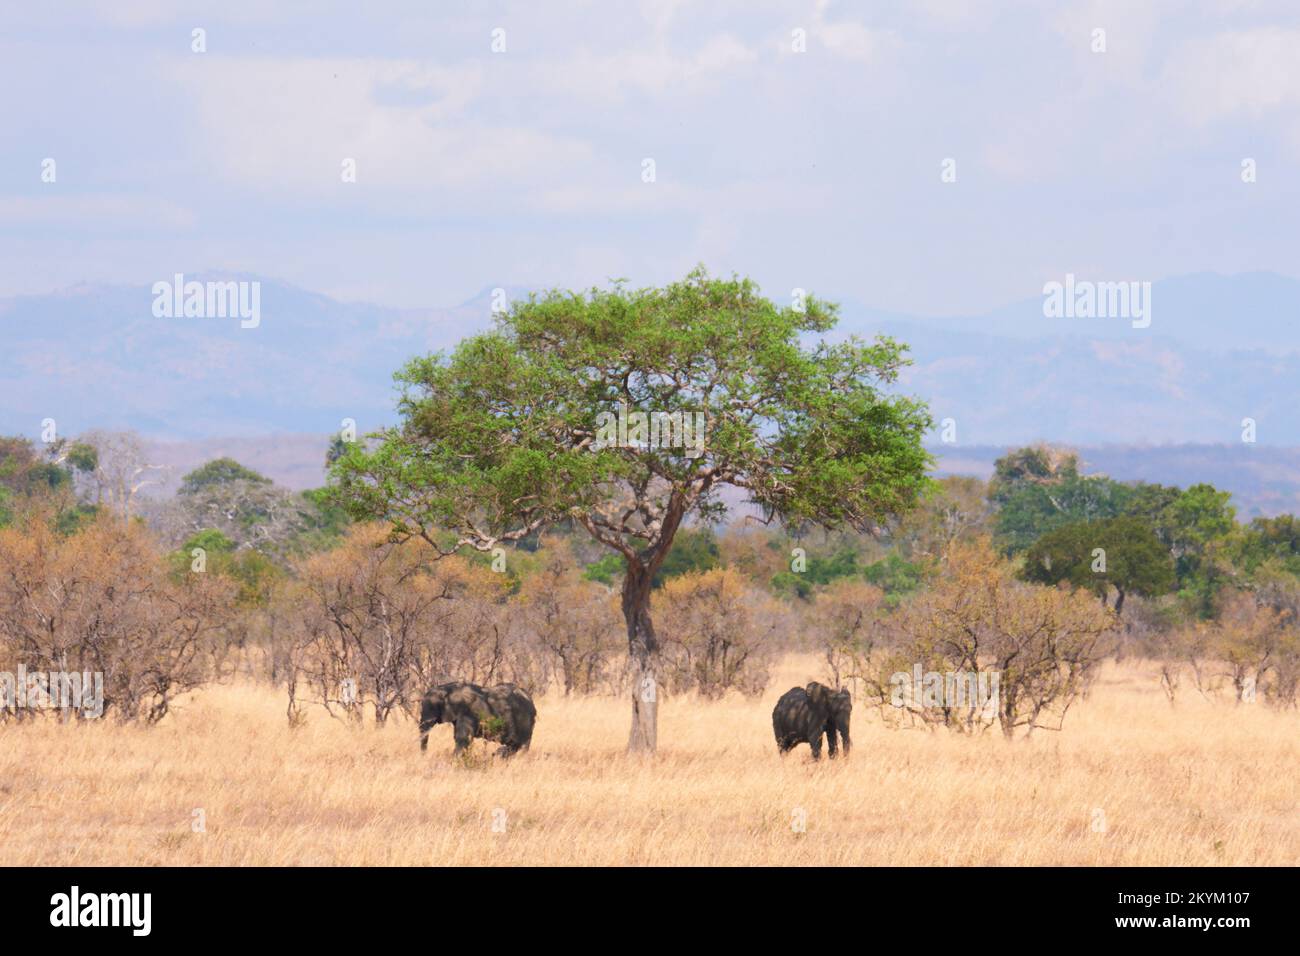 African Bush Elephants hide from the sun in the shade of a tree, seen through the shimmering heat haze  in the dry grassy plain in the midday heat of Stock Photo